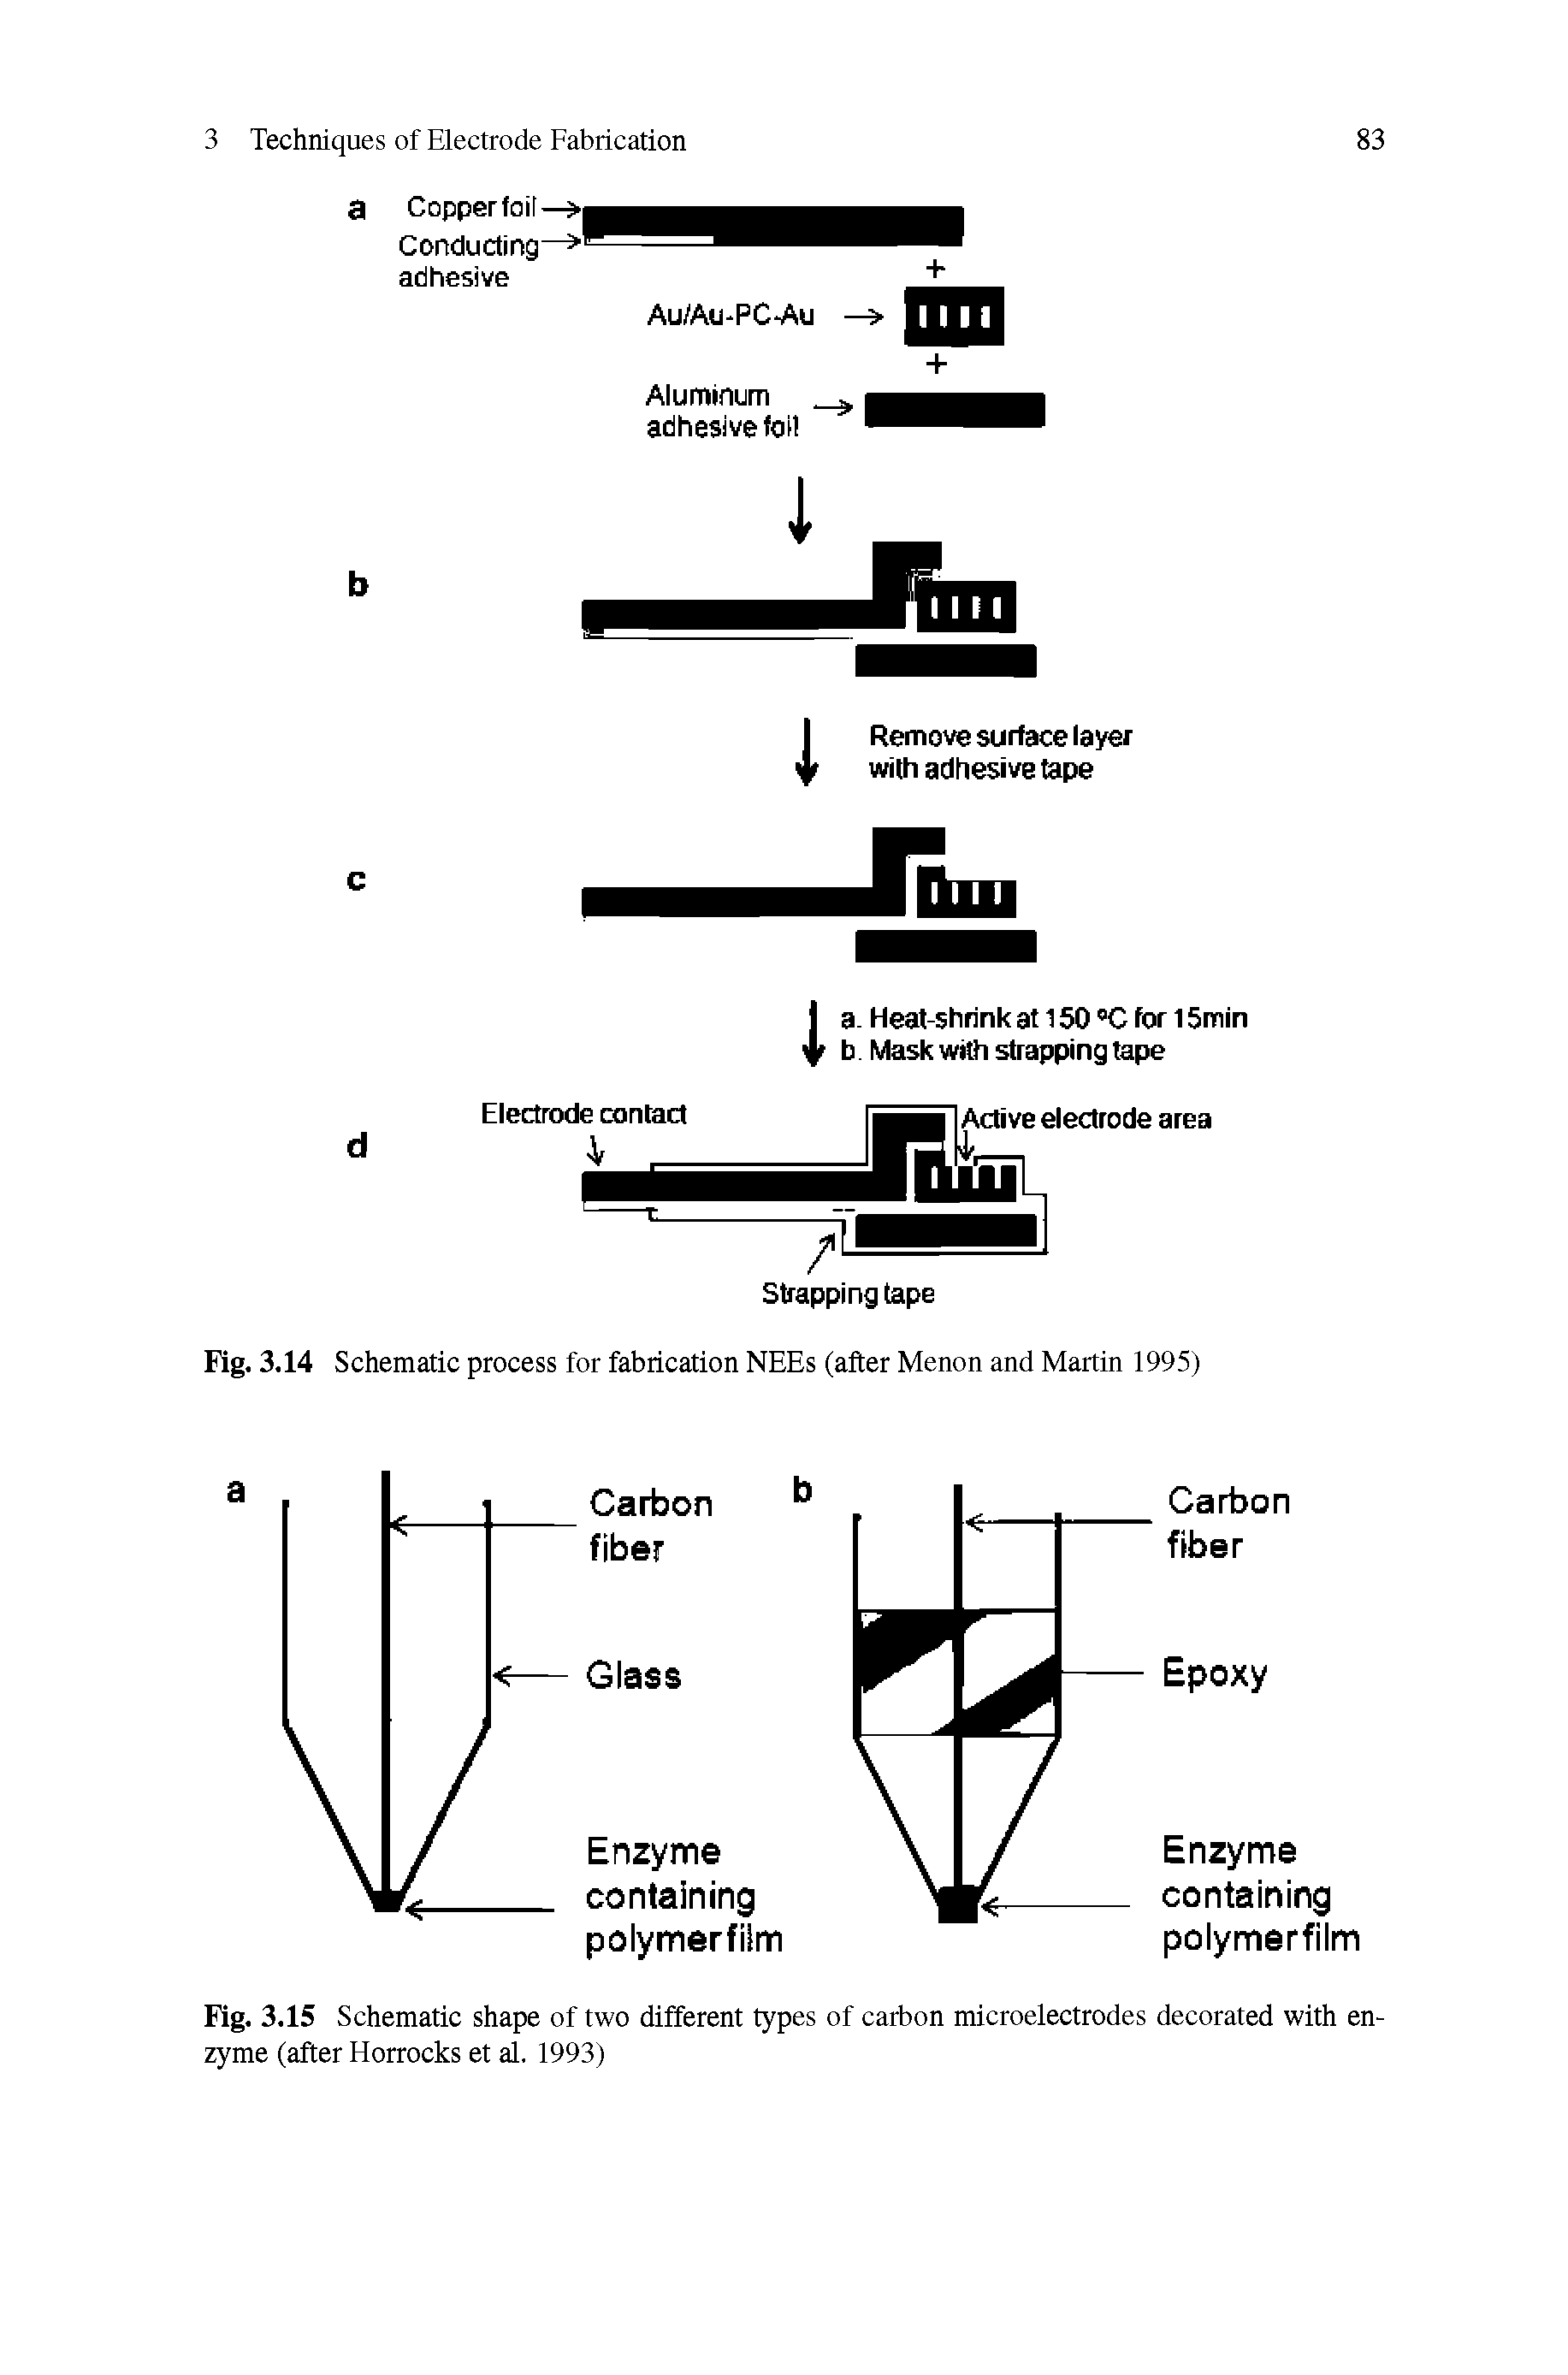 Fig. 3.15 Schematic shape of two different types of carbon microelectrodes decorated with enzyme (after Horrocks et al. 1993)...